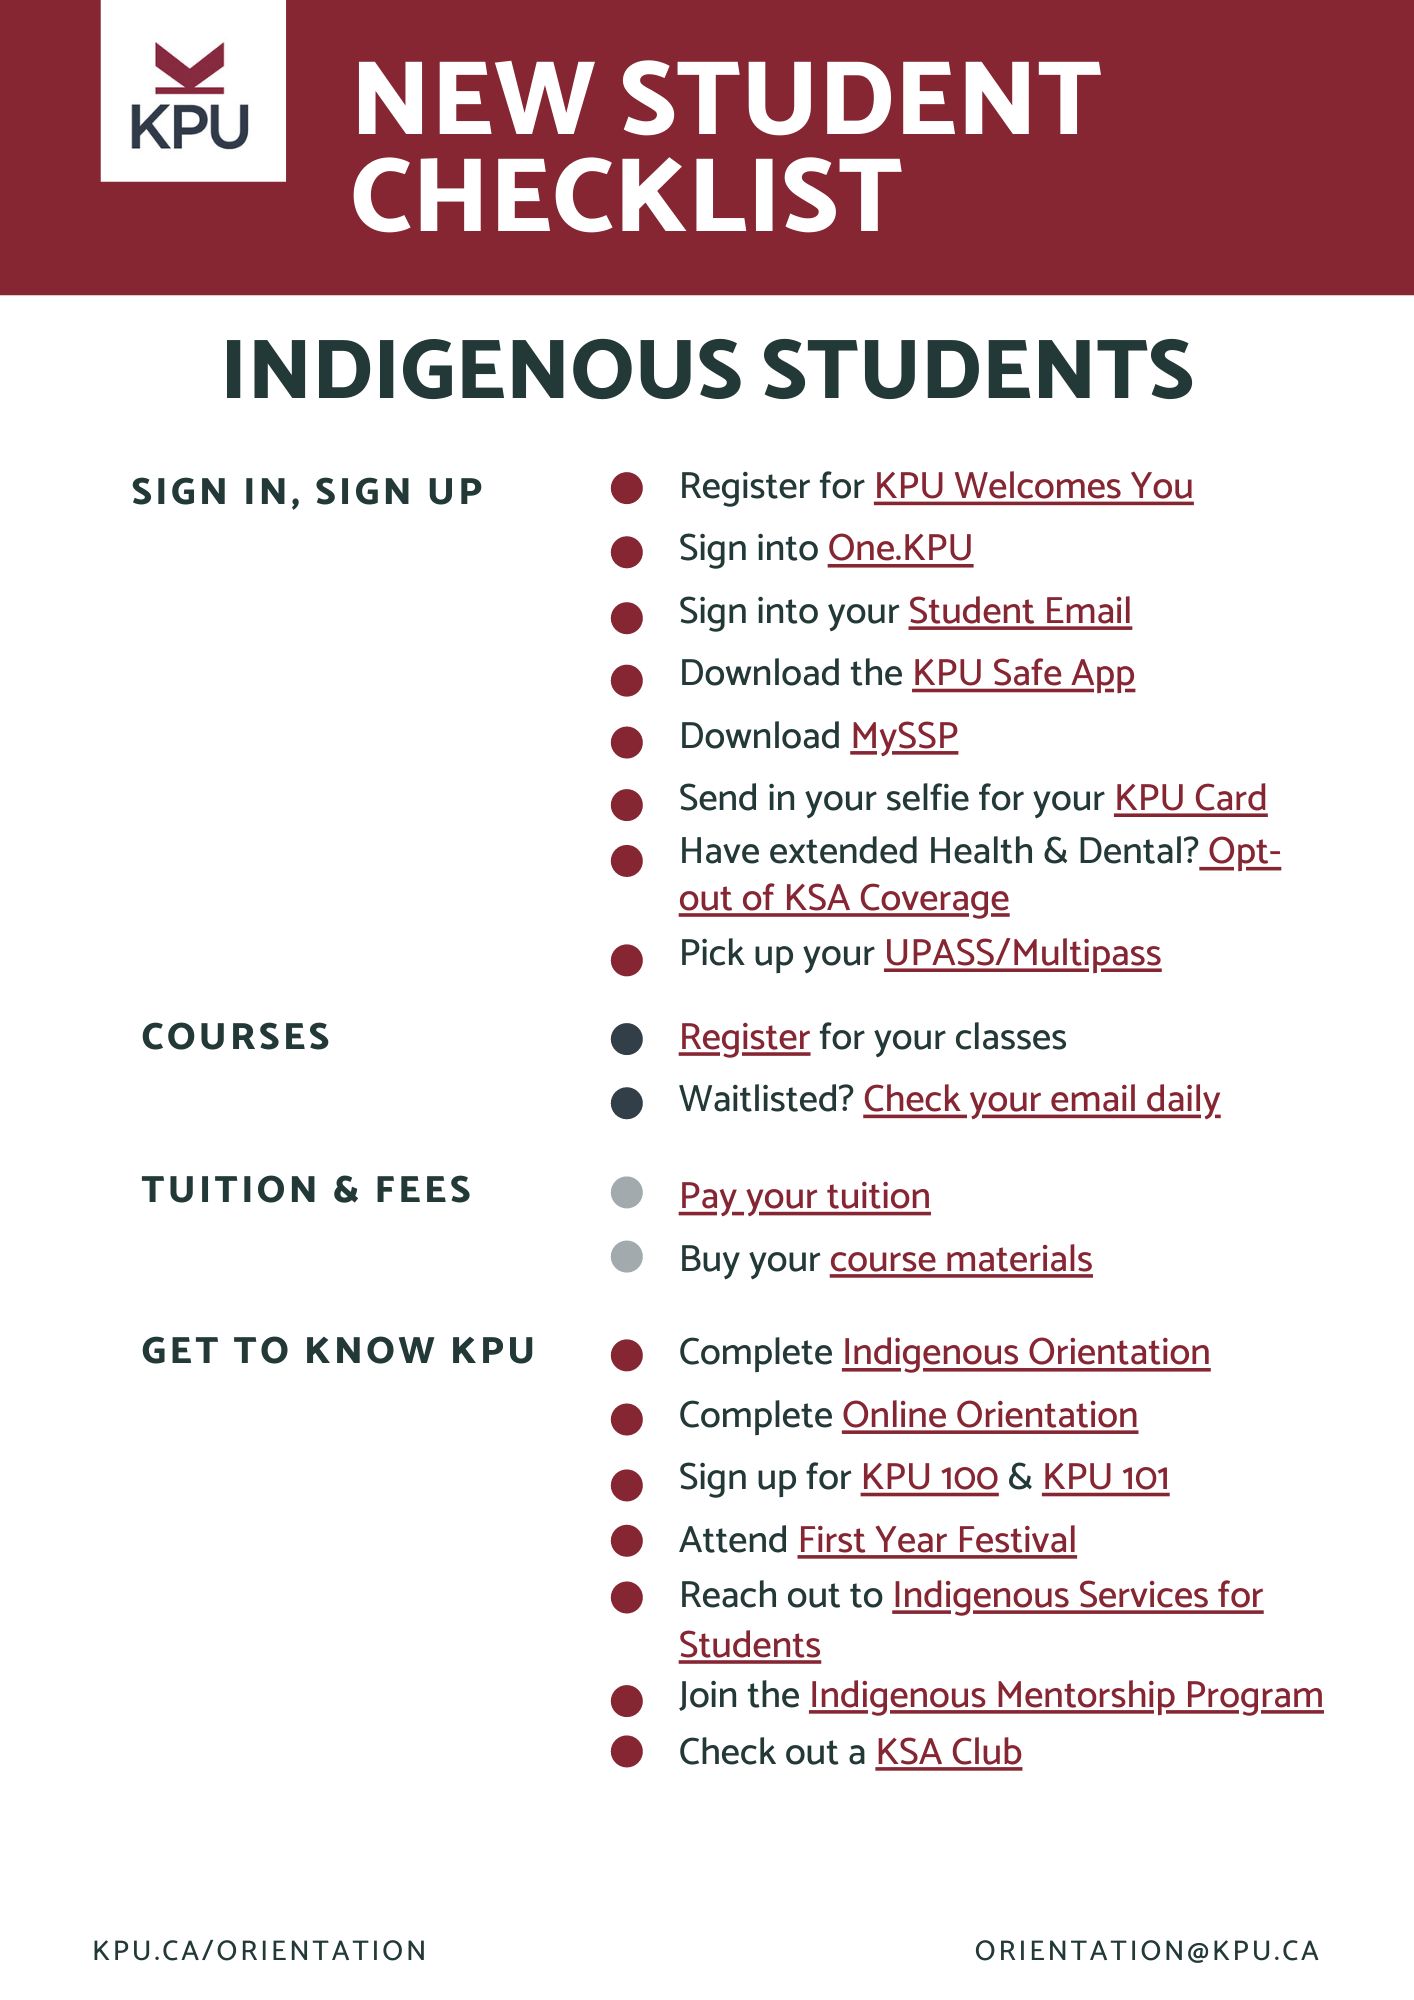 Indigenous New Student Checklist 